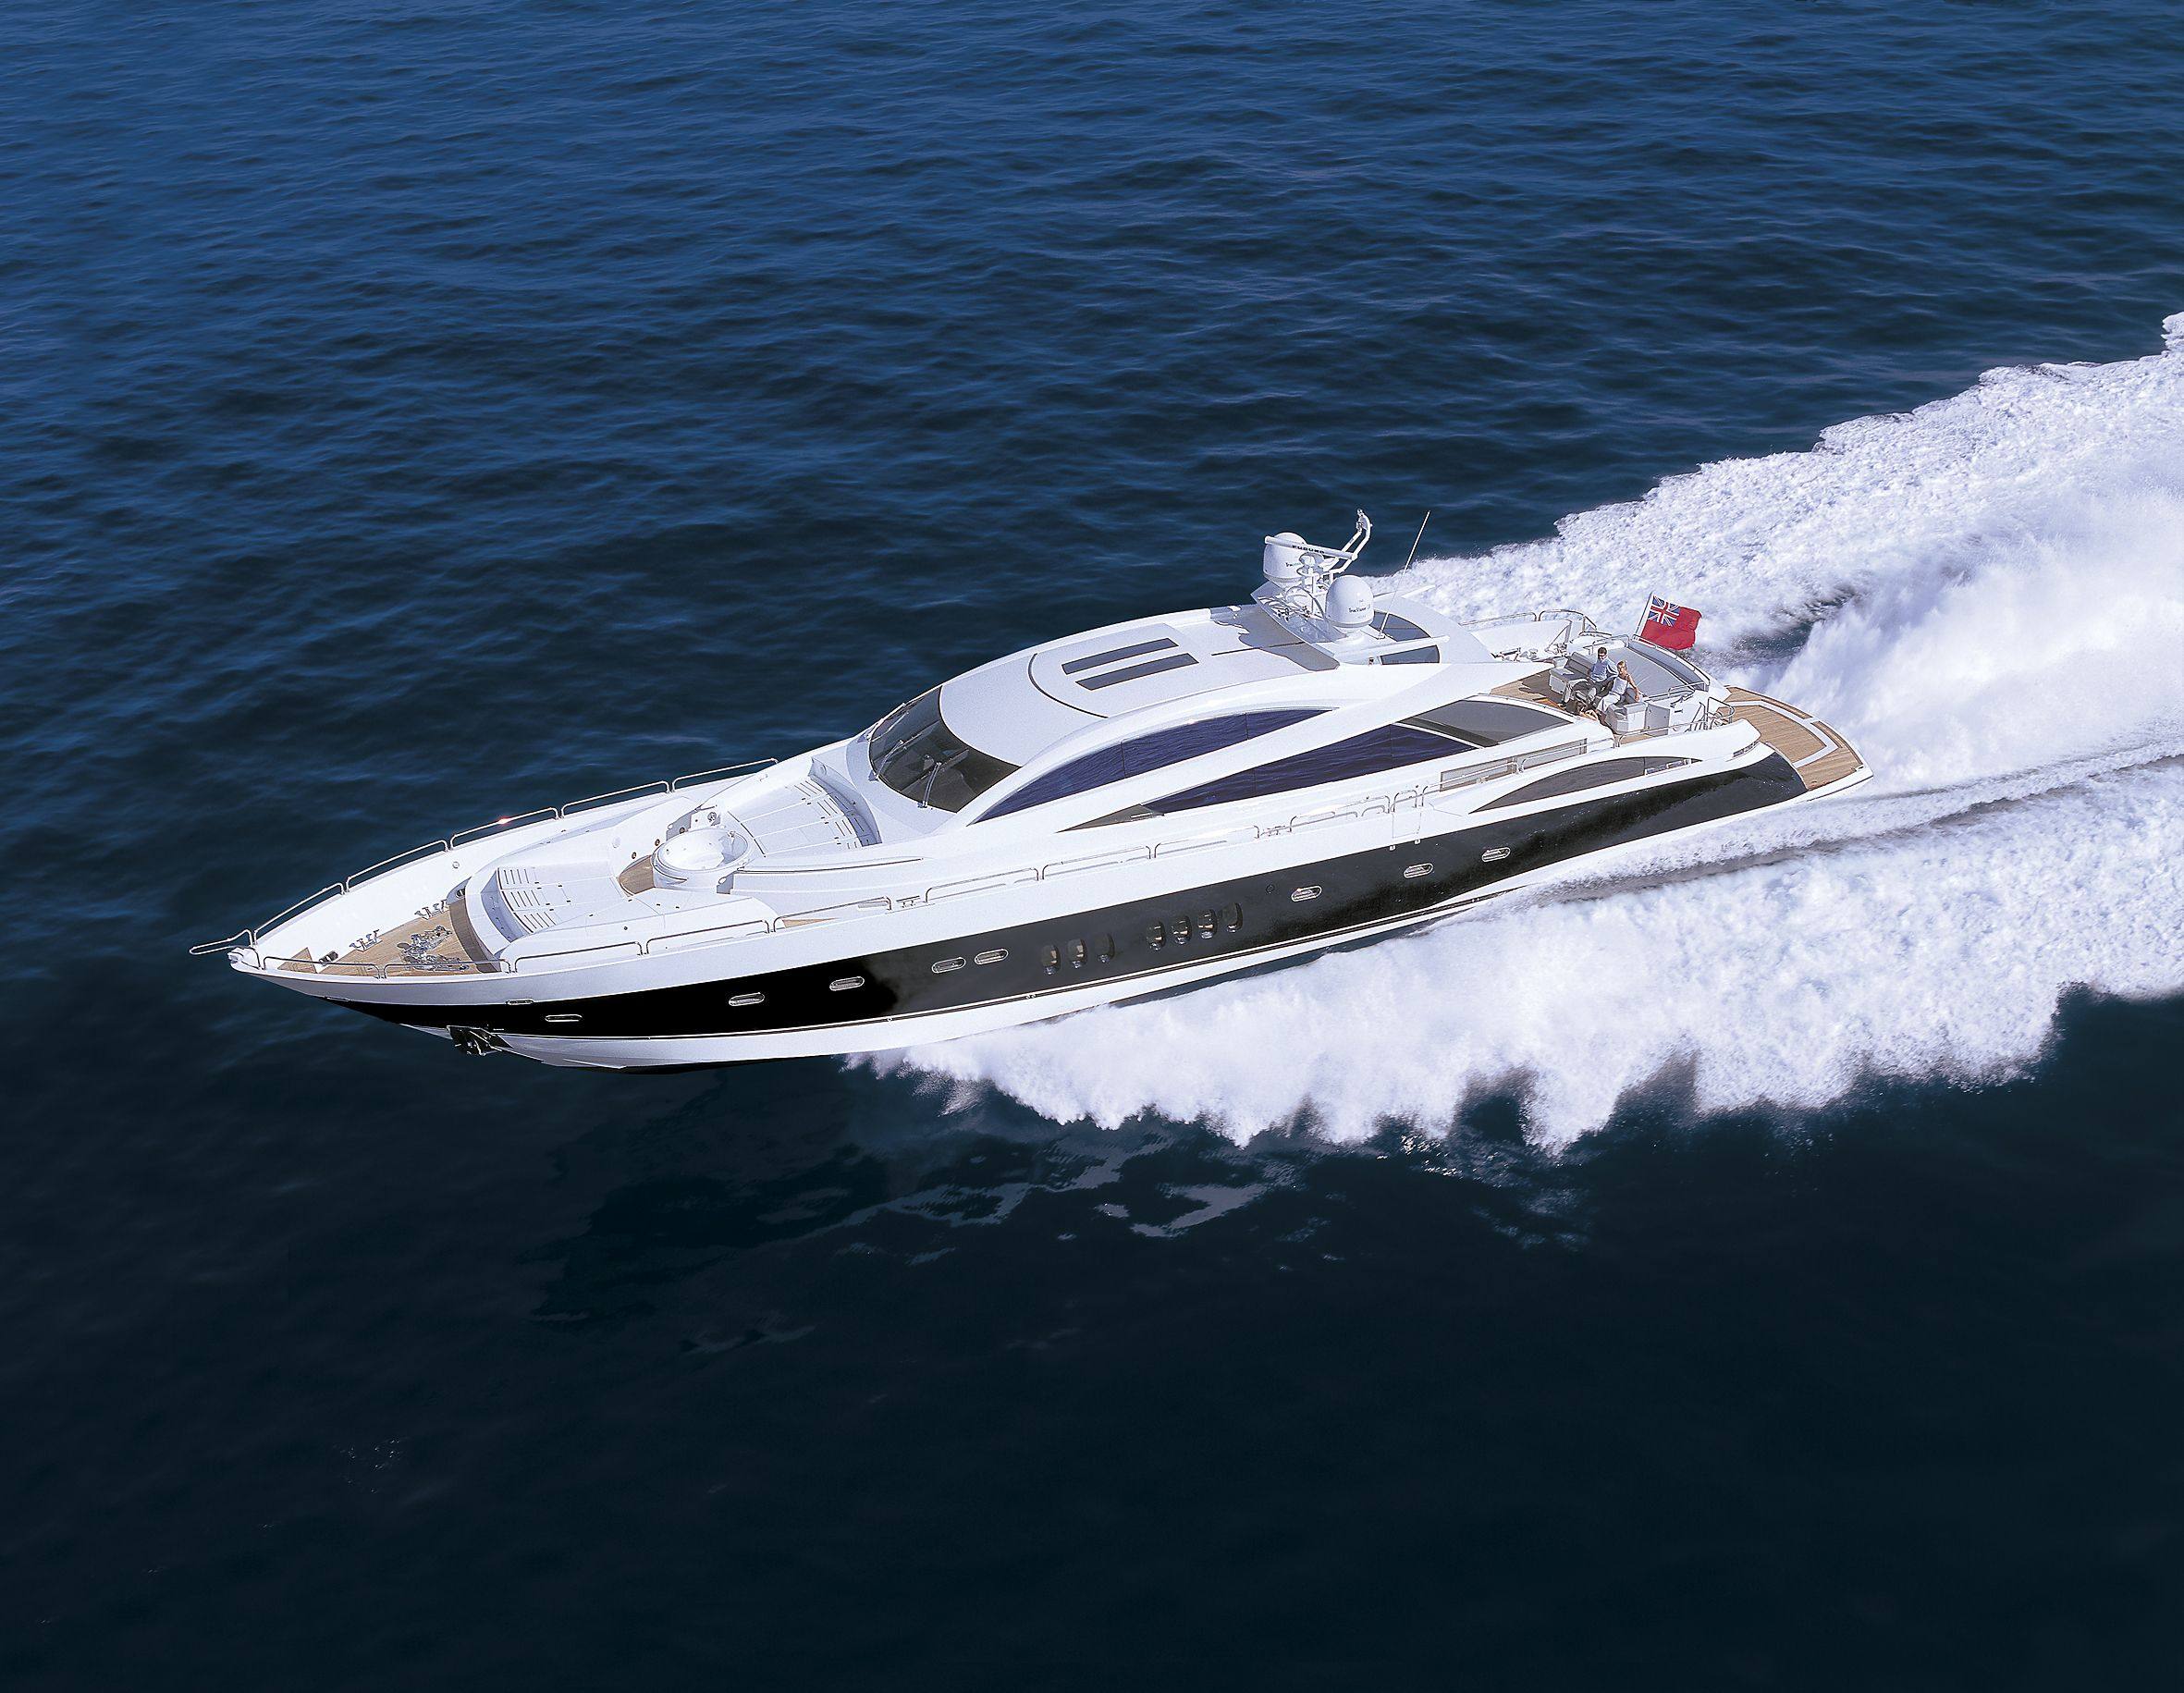 A Sunseeker Predator 108 yacht, featured in the James Bond film Casino Royale, capable of sailing at up to 50 miles per hour. Photo: Handout 